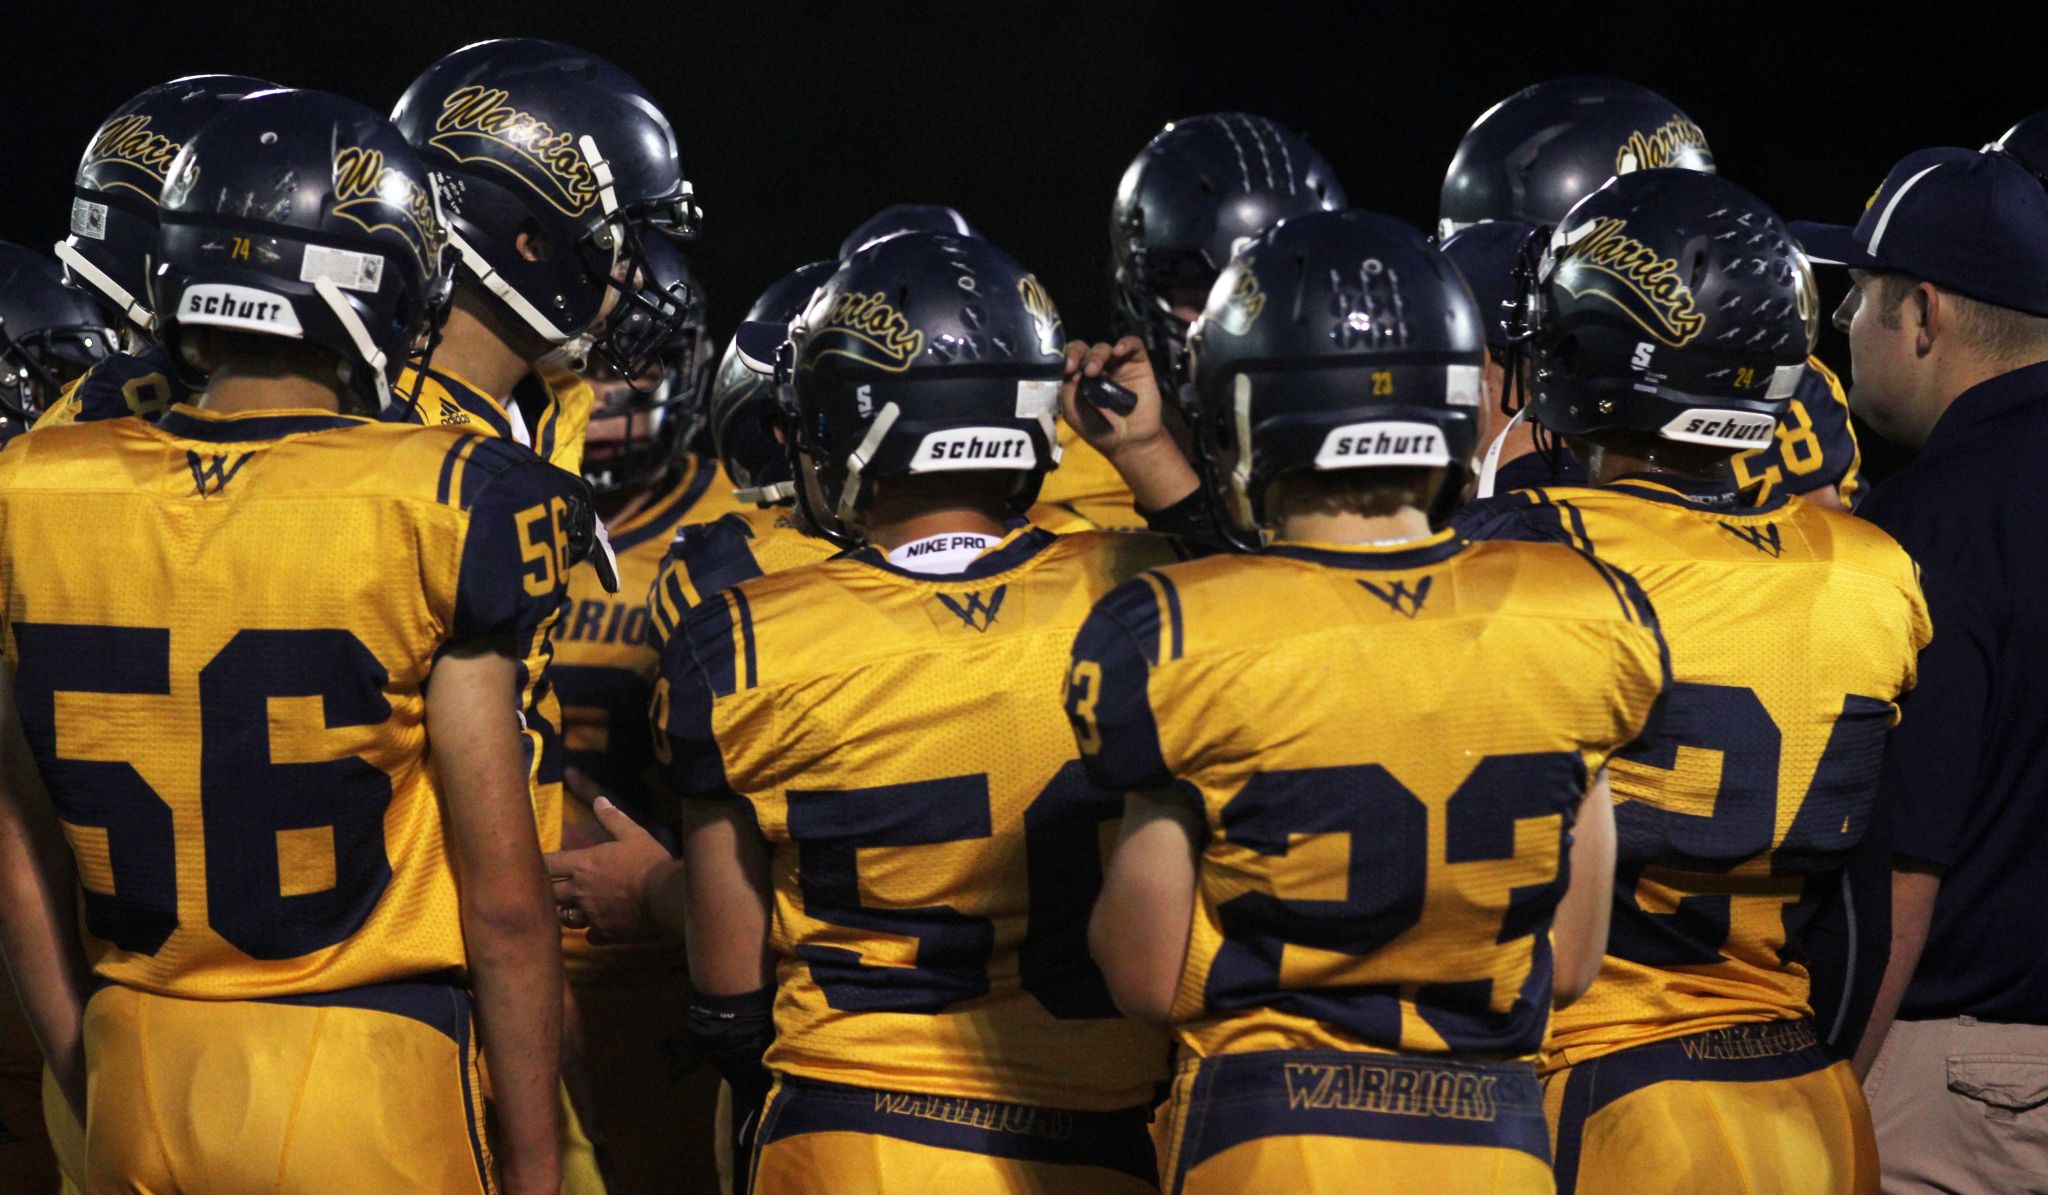 MHSAA alters 8player football playoff selection criteria